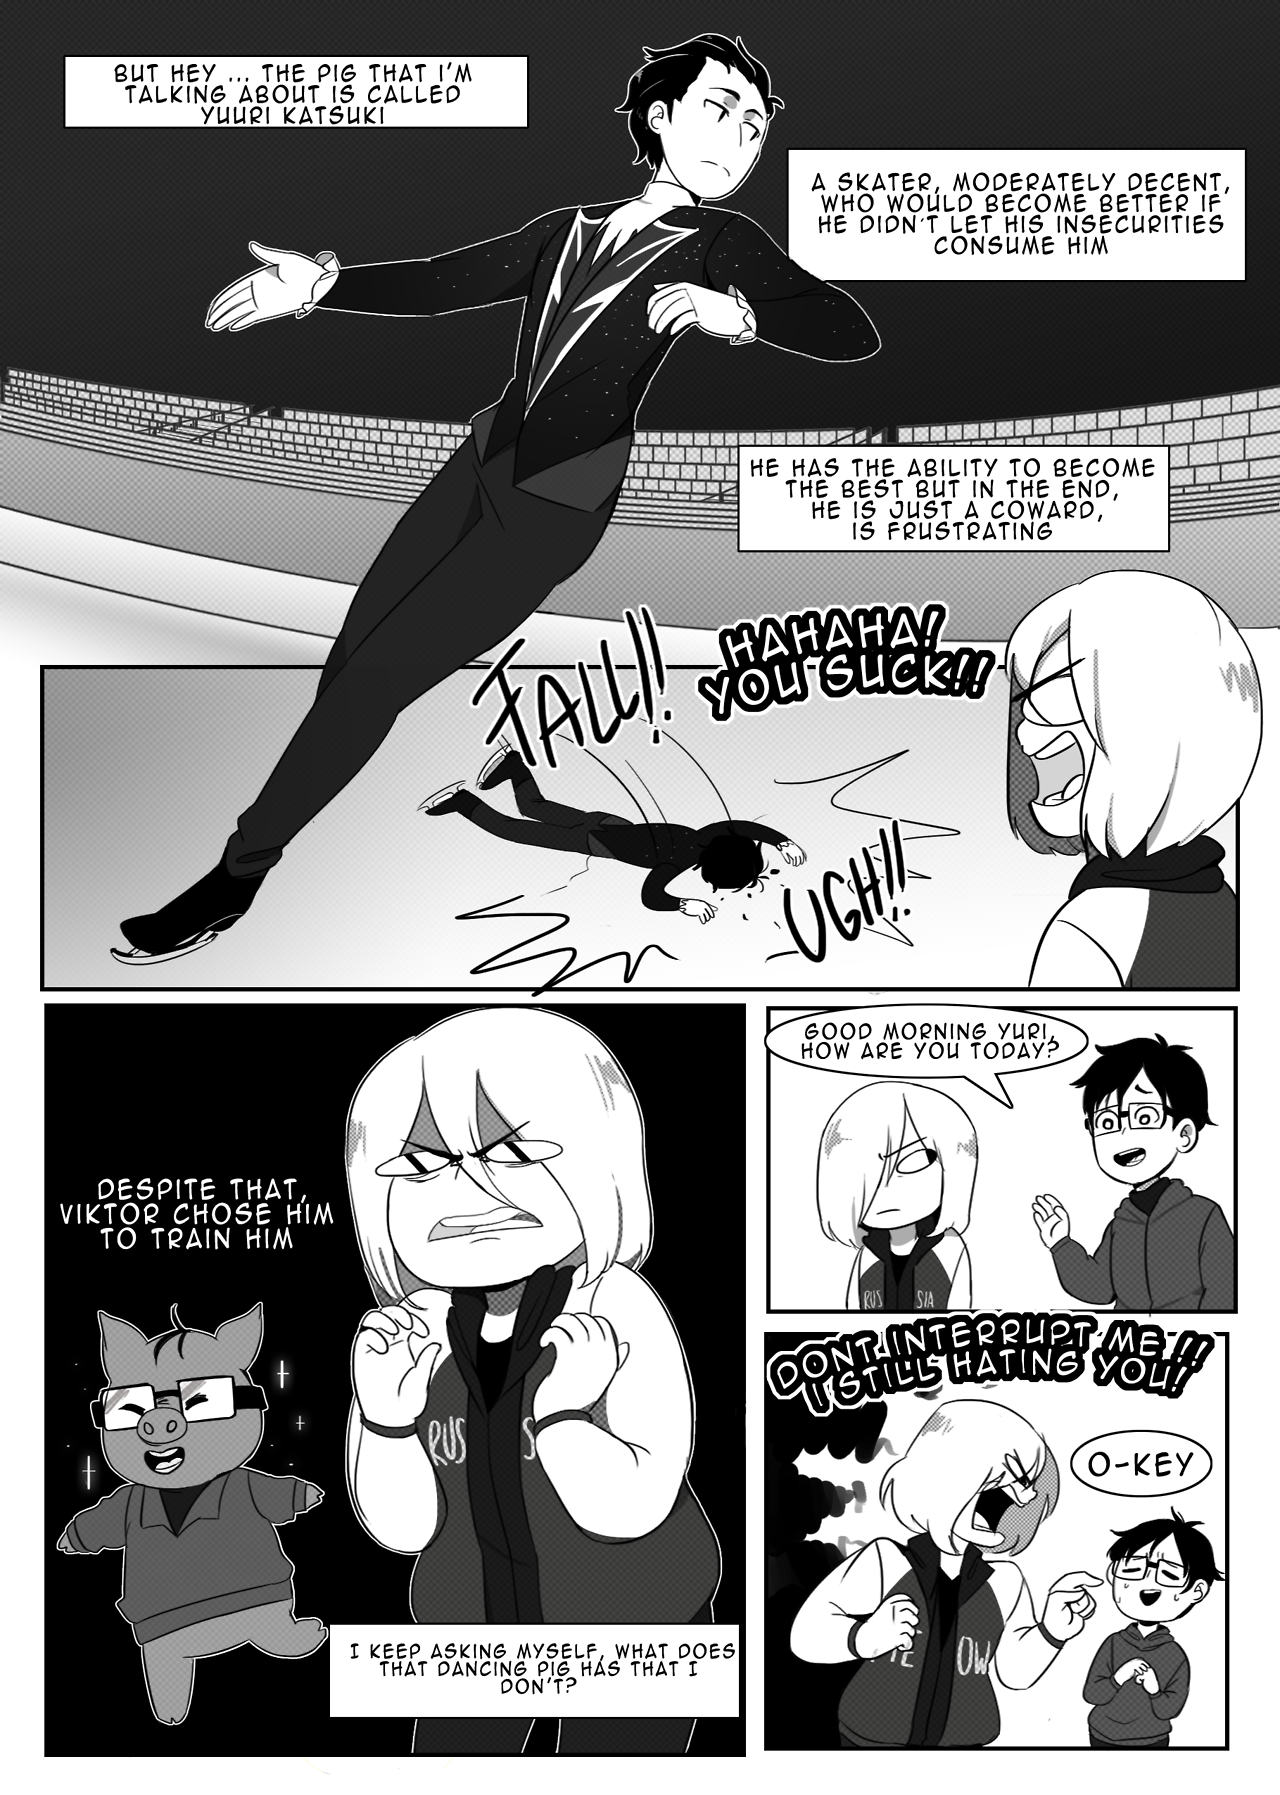 malengilblog: Yuri on ice parody, completed  This was part of a yuri on ice Fanbook